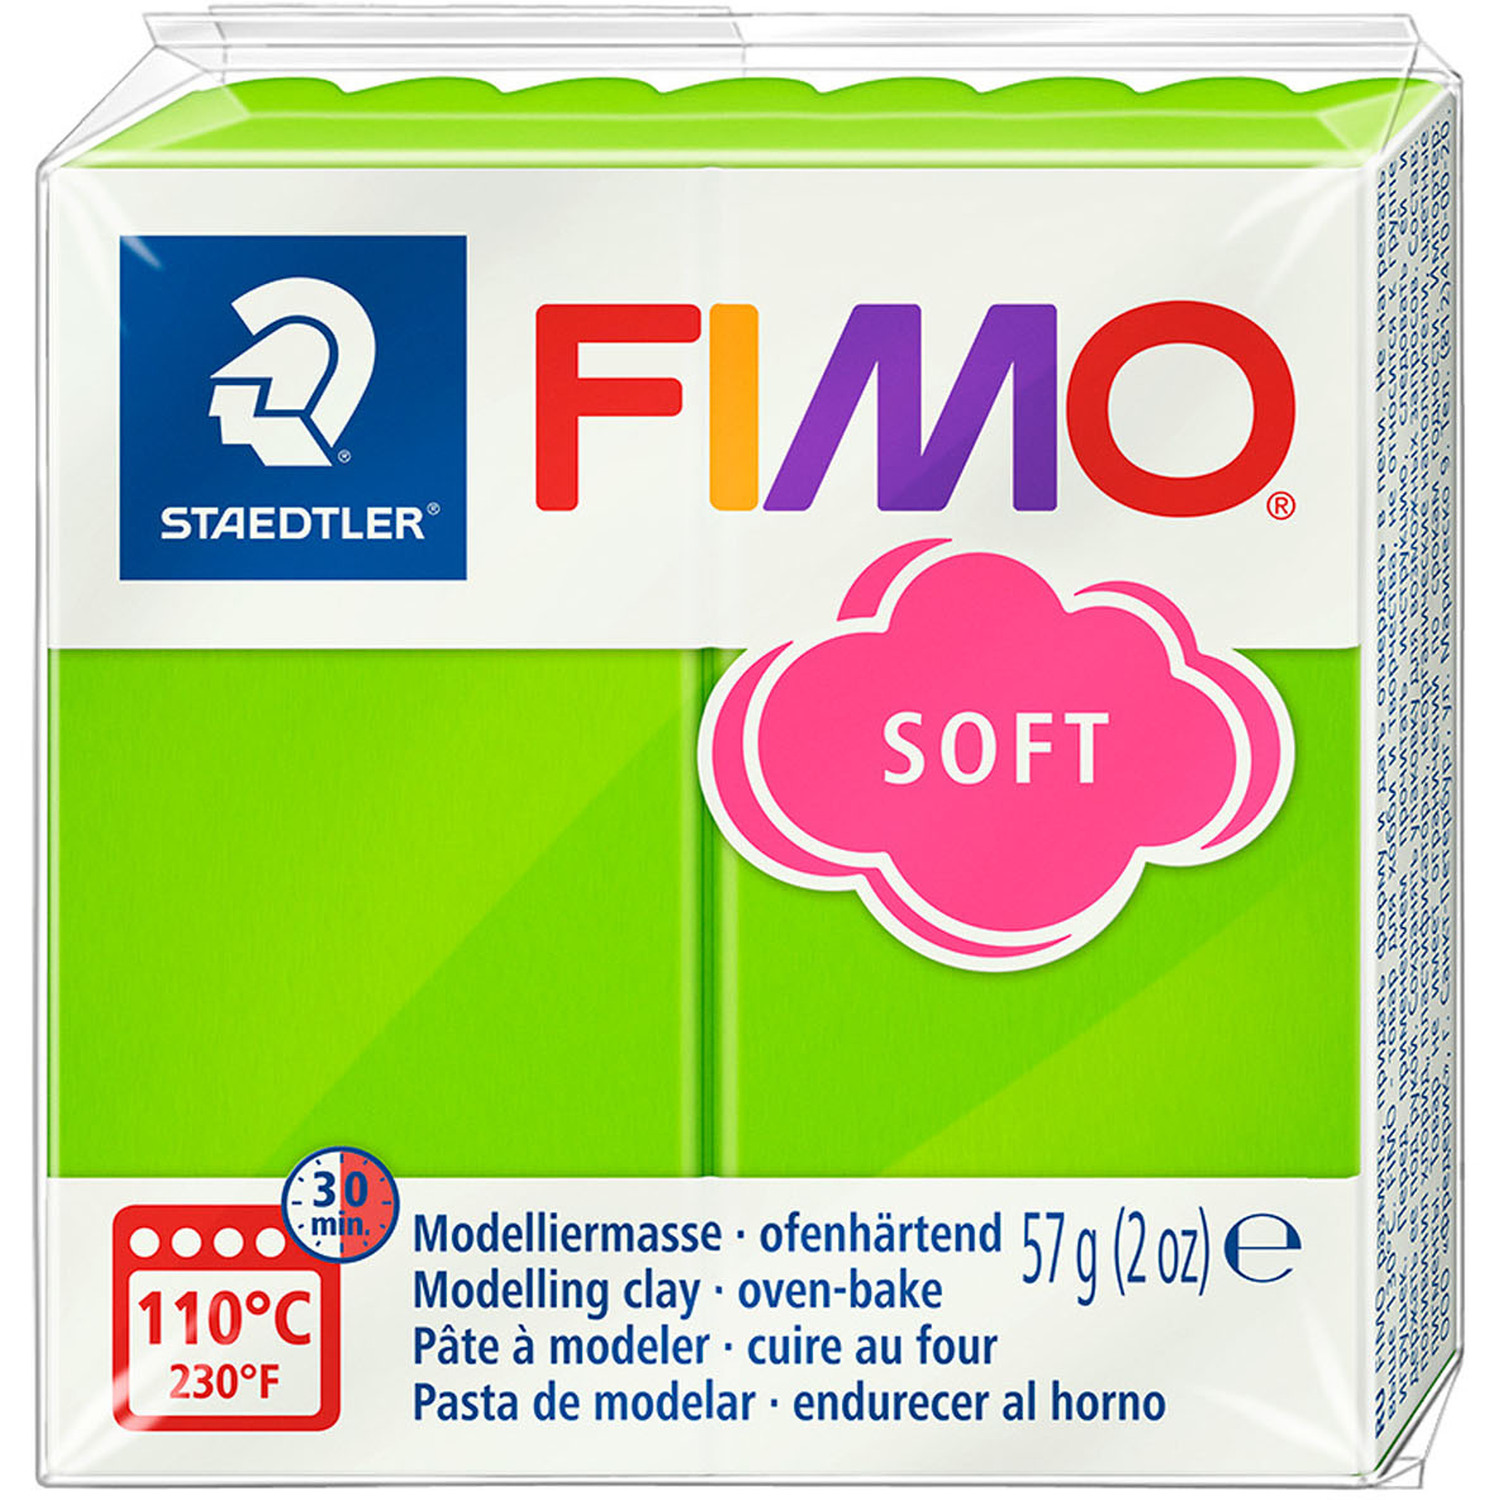 Staedtler FIMO Soft Modelling Clay Block - Emerald Image 3